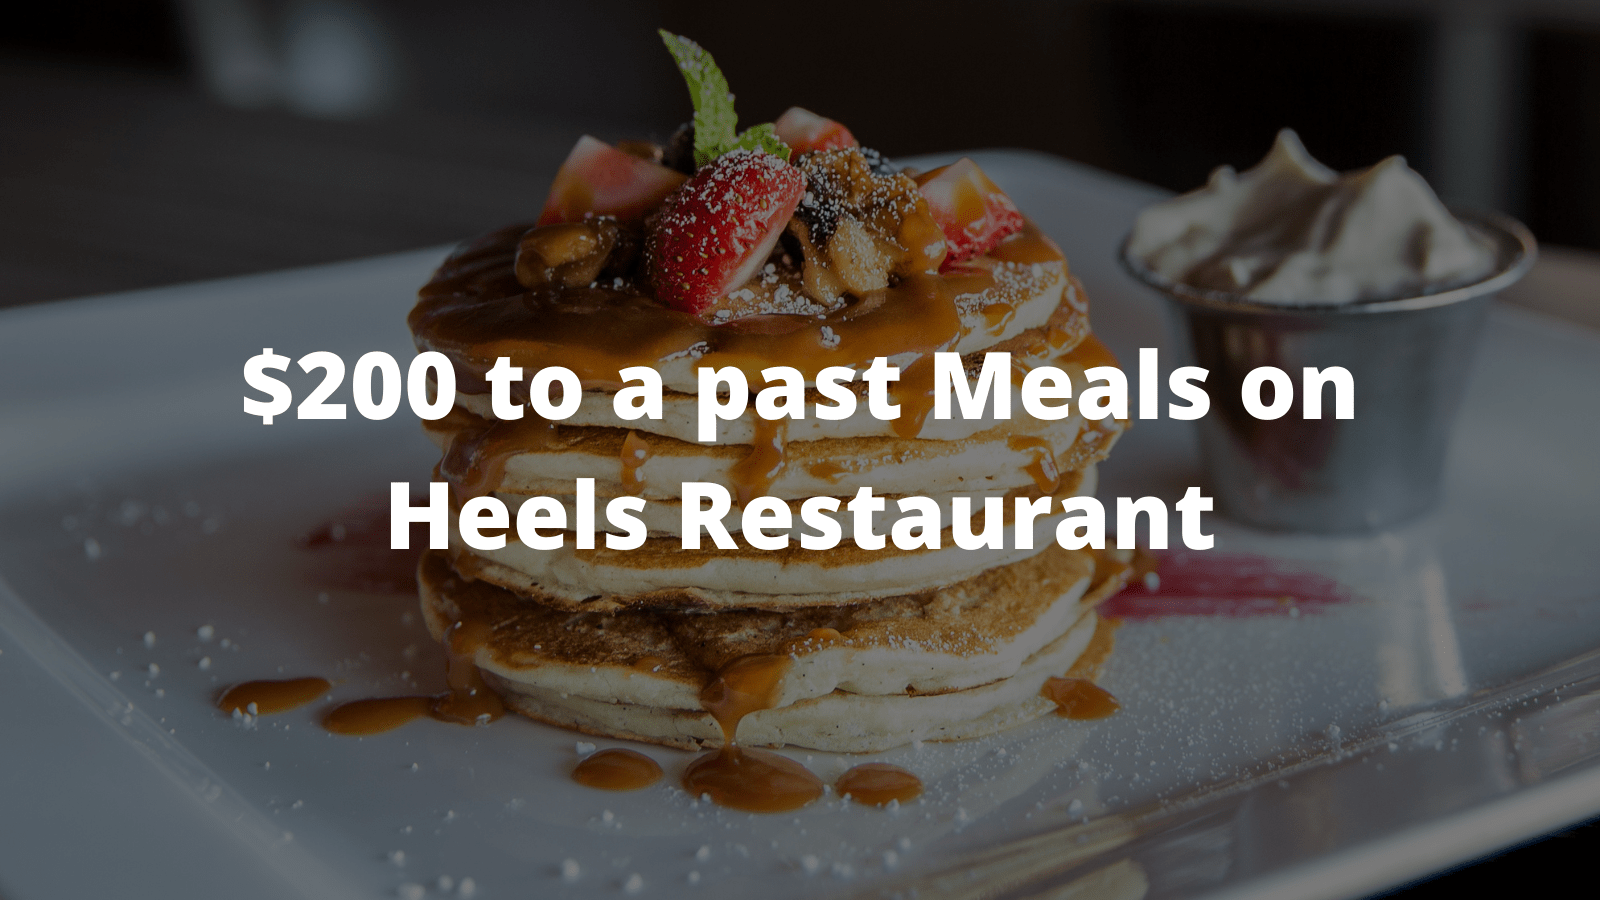 $200 to a past Meals on Heels Restaurant